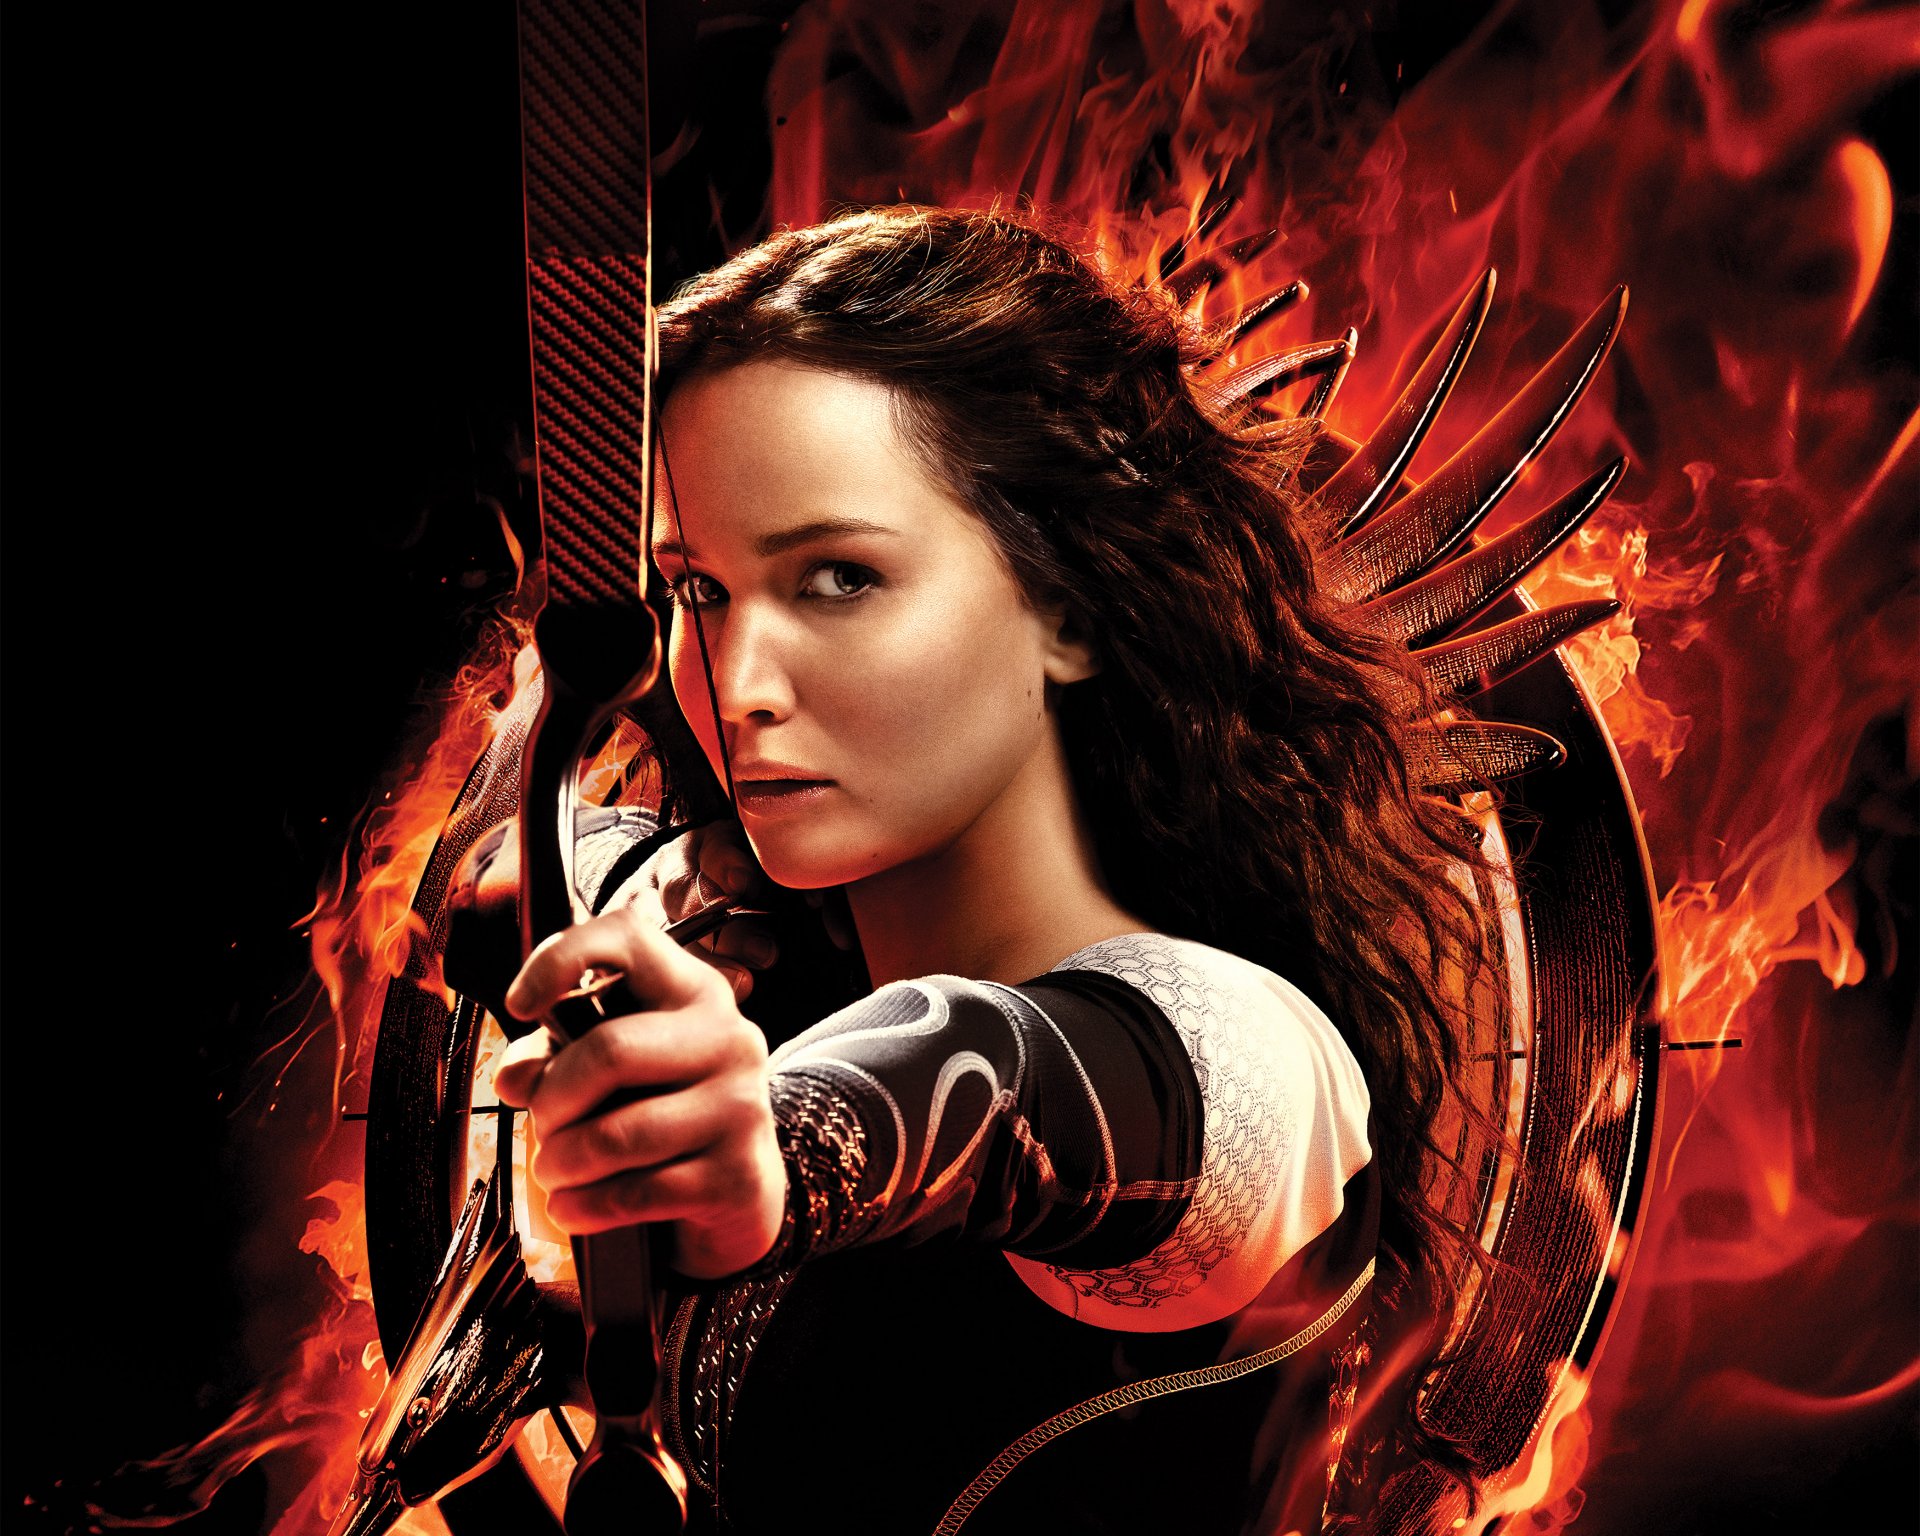 hunger games catching fire full movie download utorrent